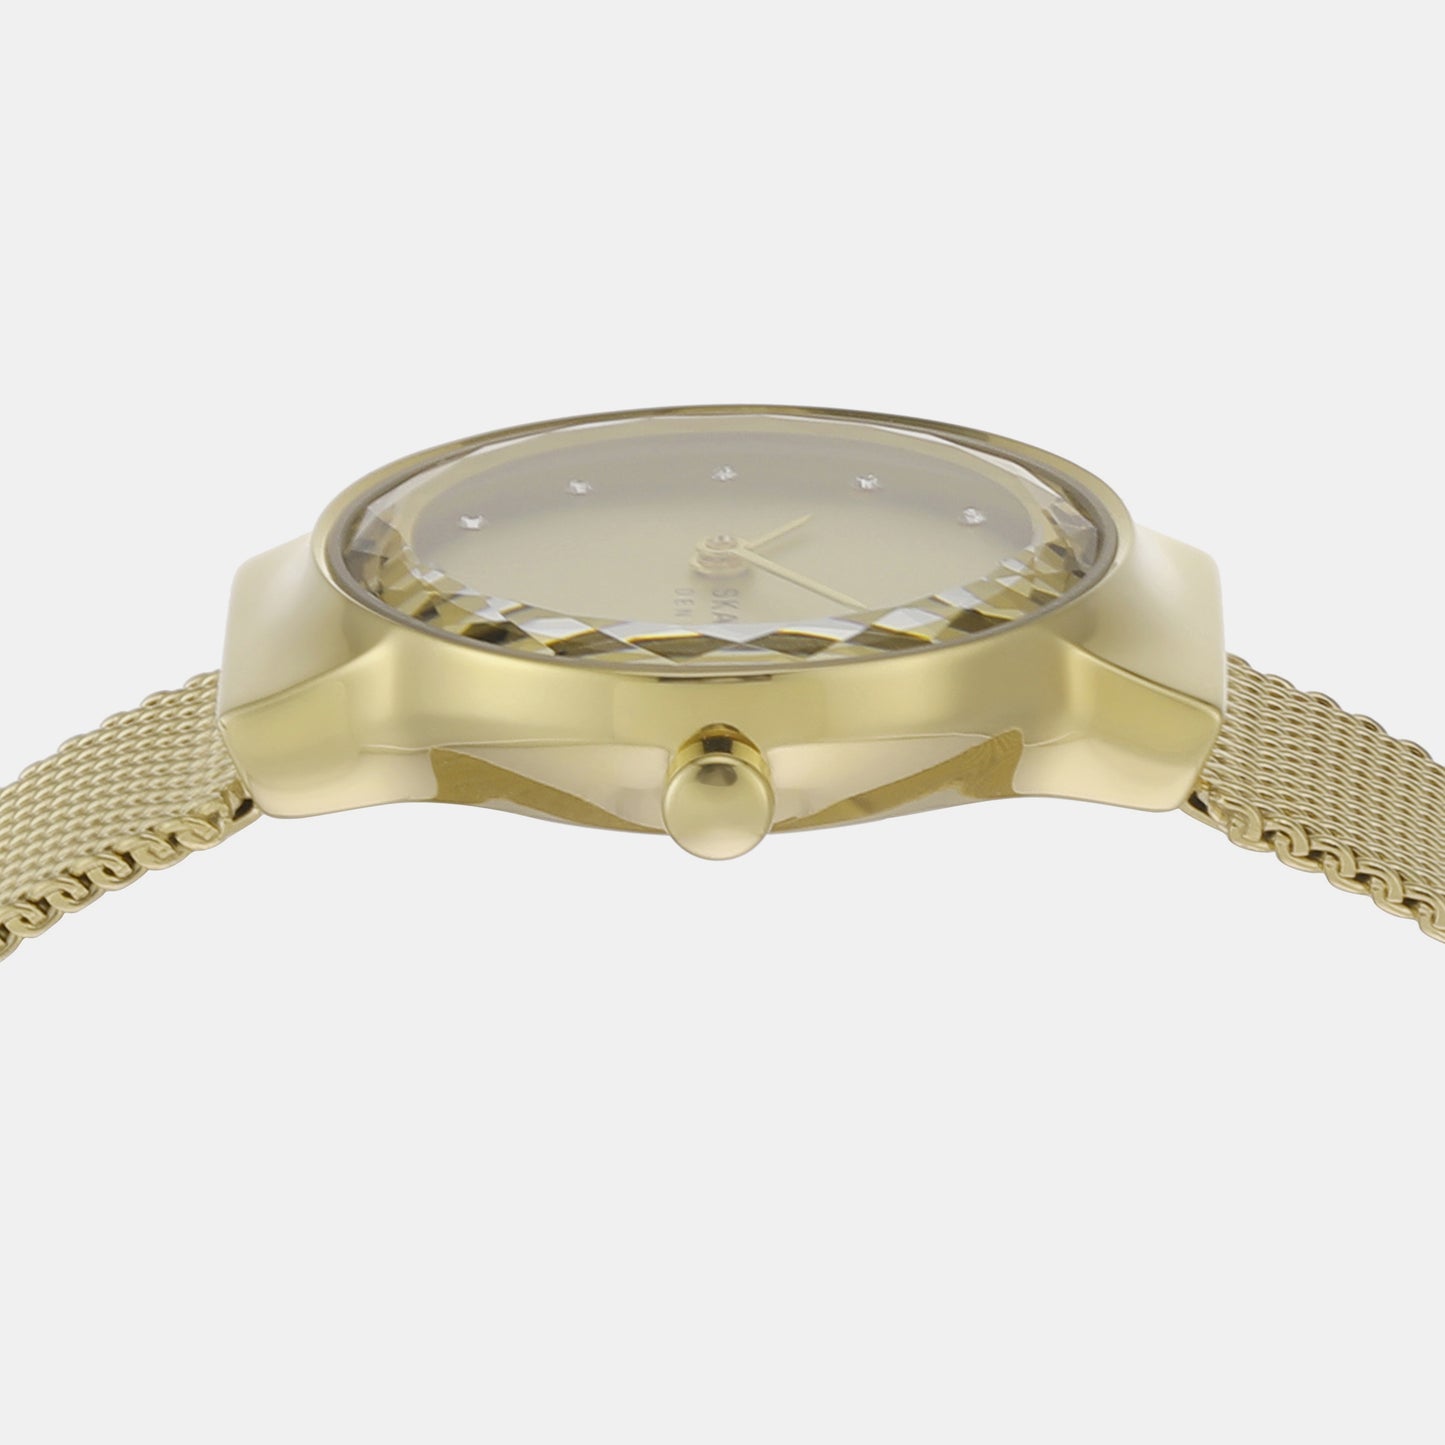 Female Gold Analog Stainless Steel Watch SKW3110